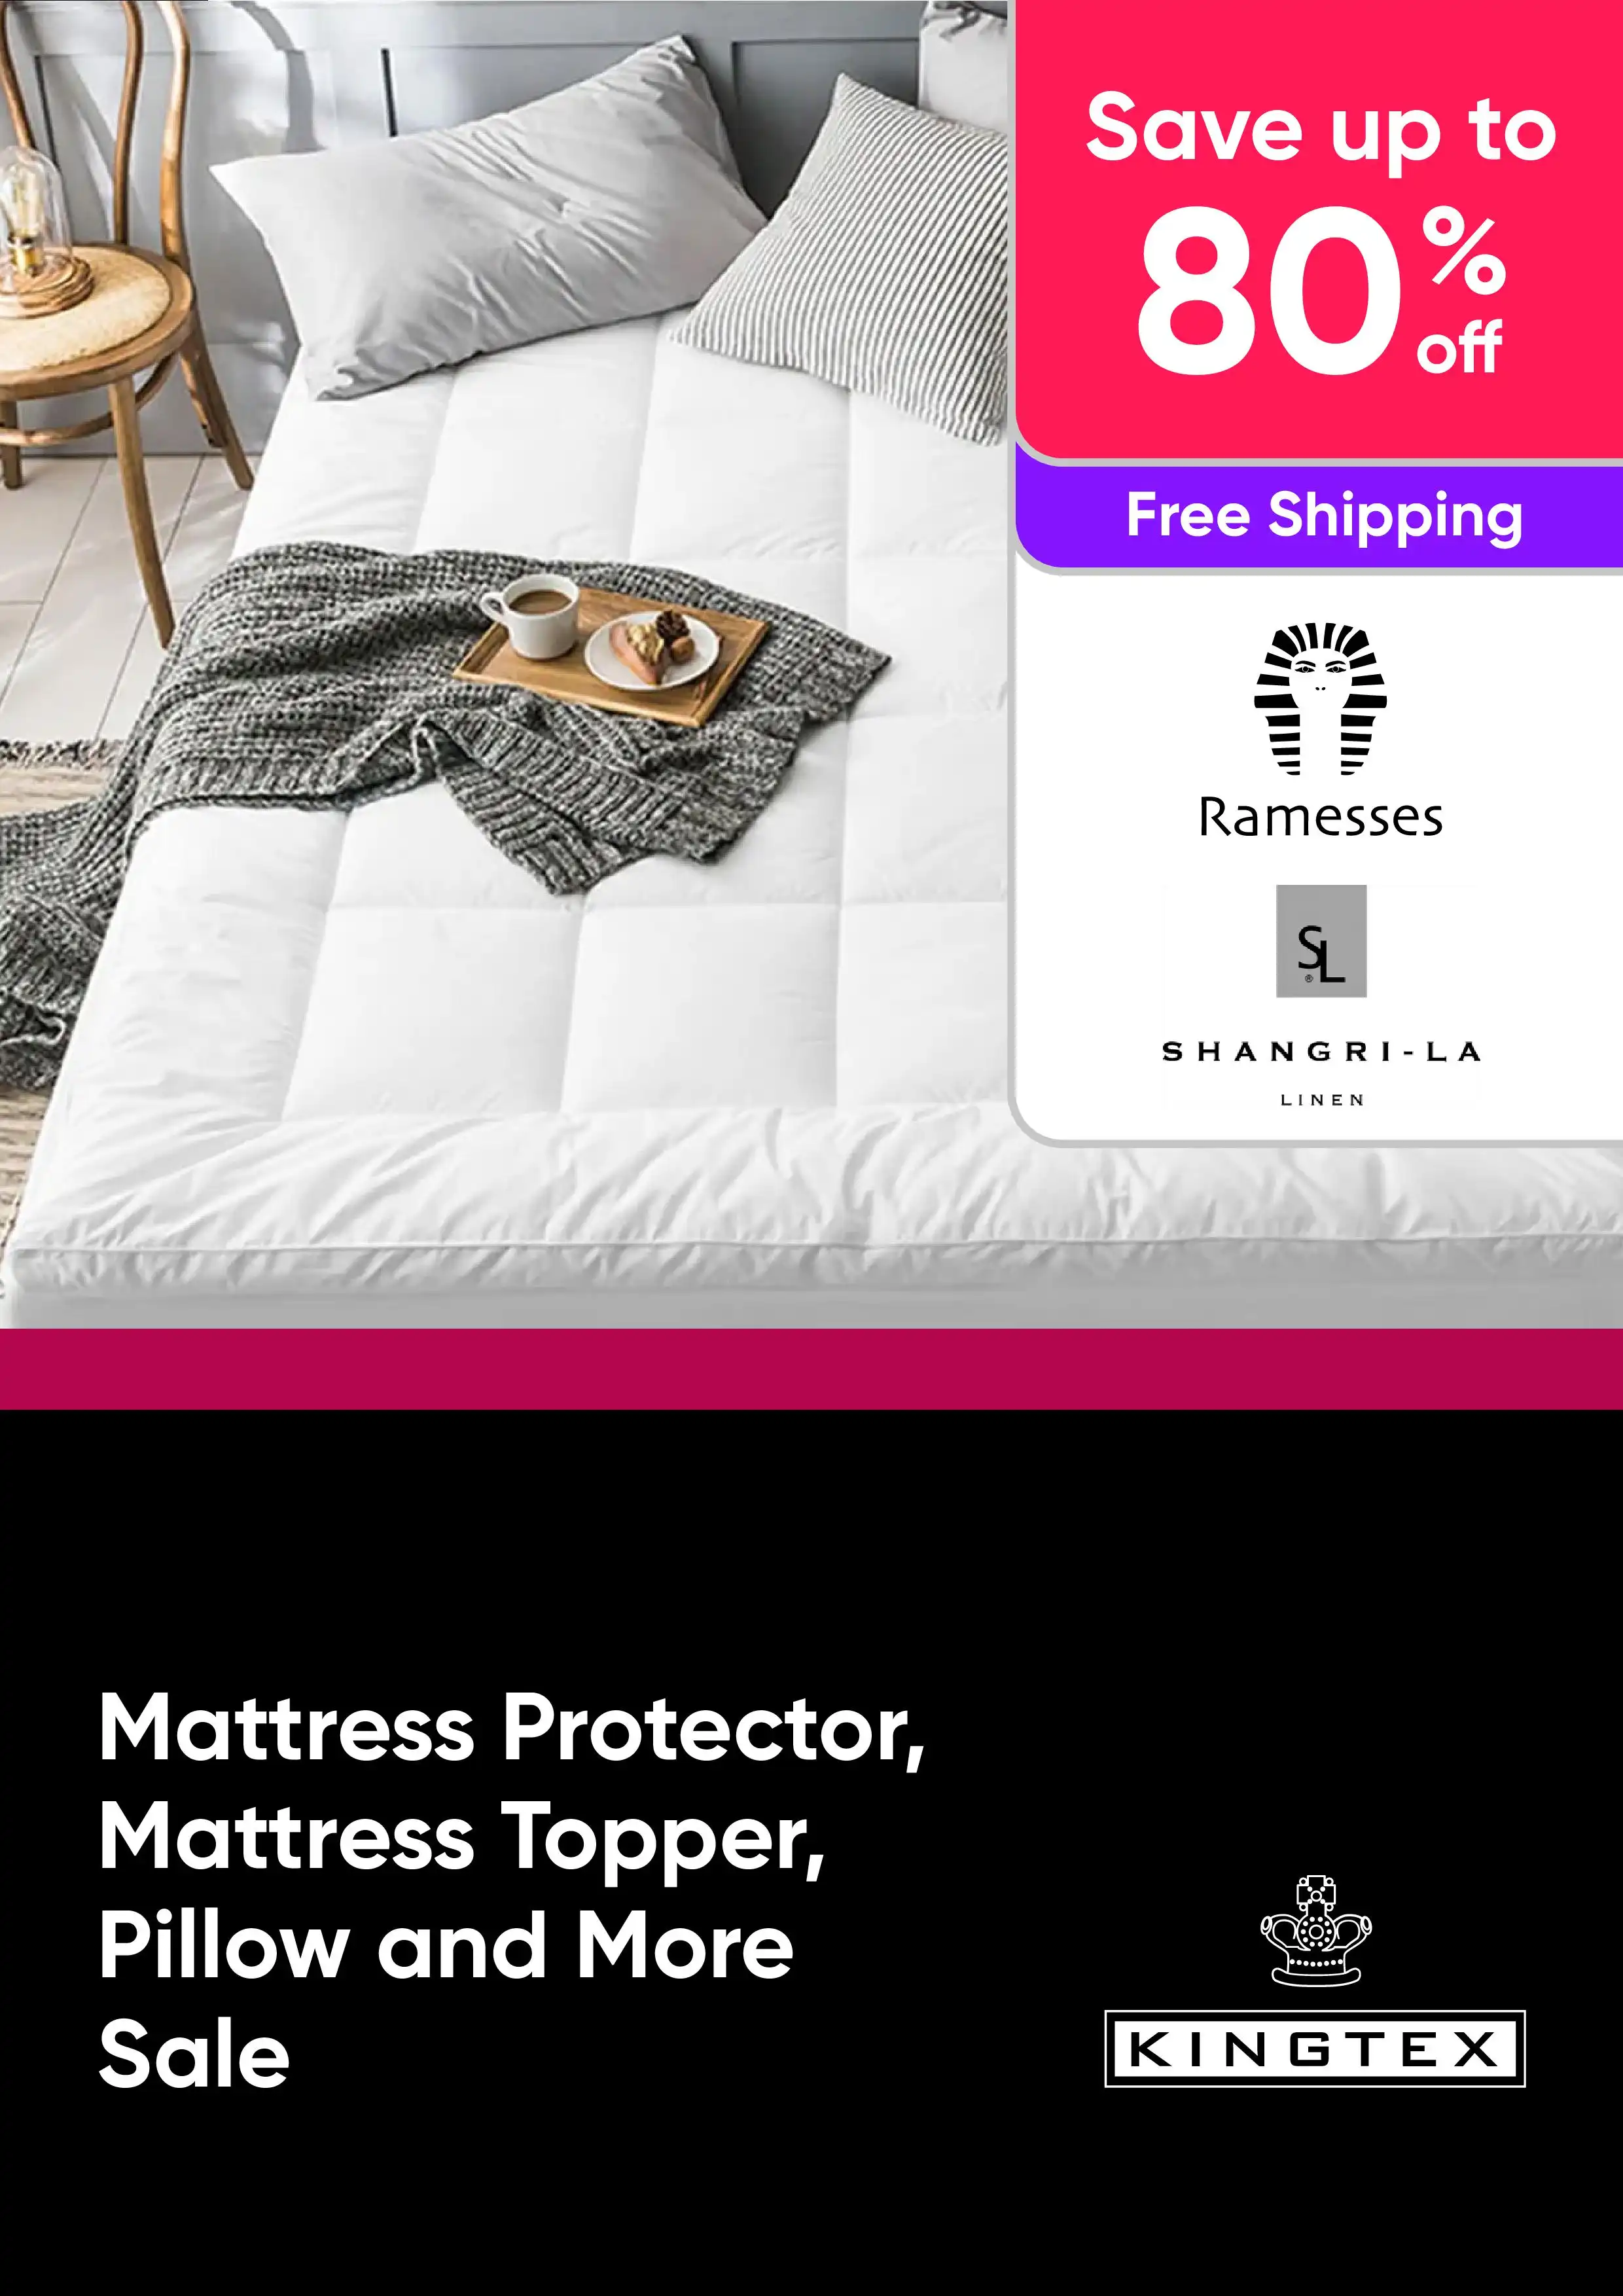 Mattress Protector, Mattress Topper, Pillow and More Sale - Ramesses, Shangir-la - Up to 80% Off